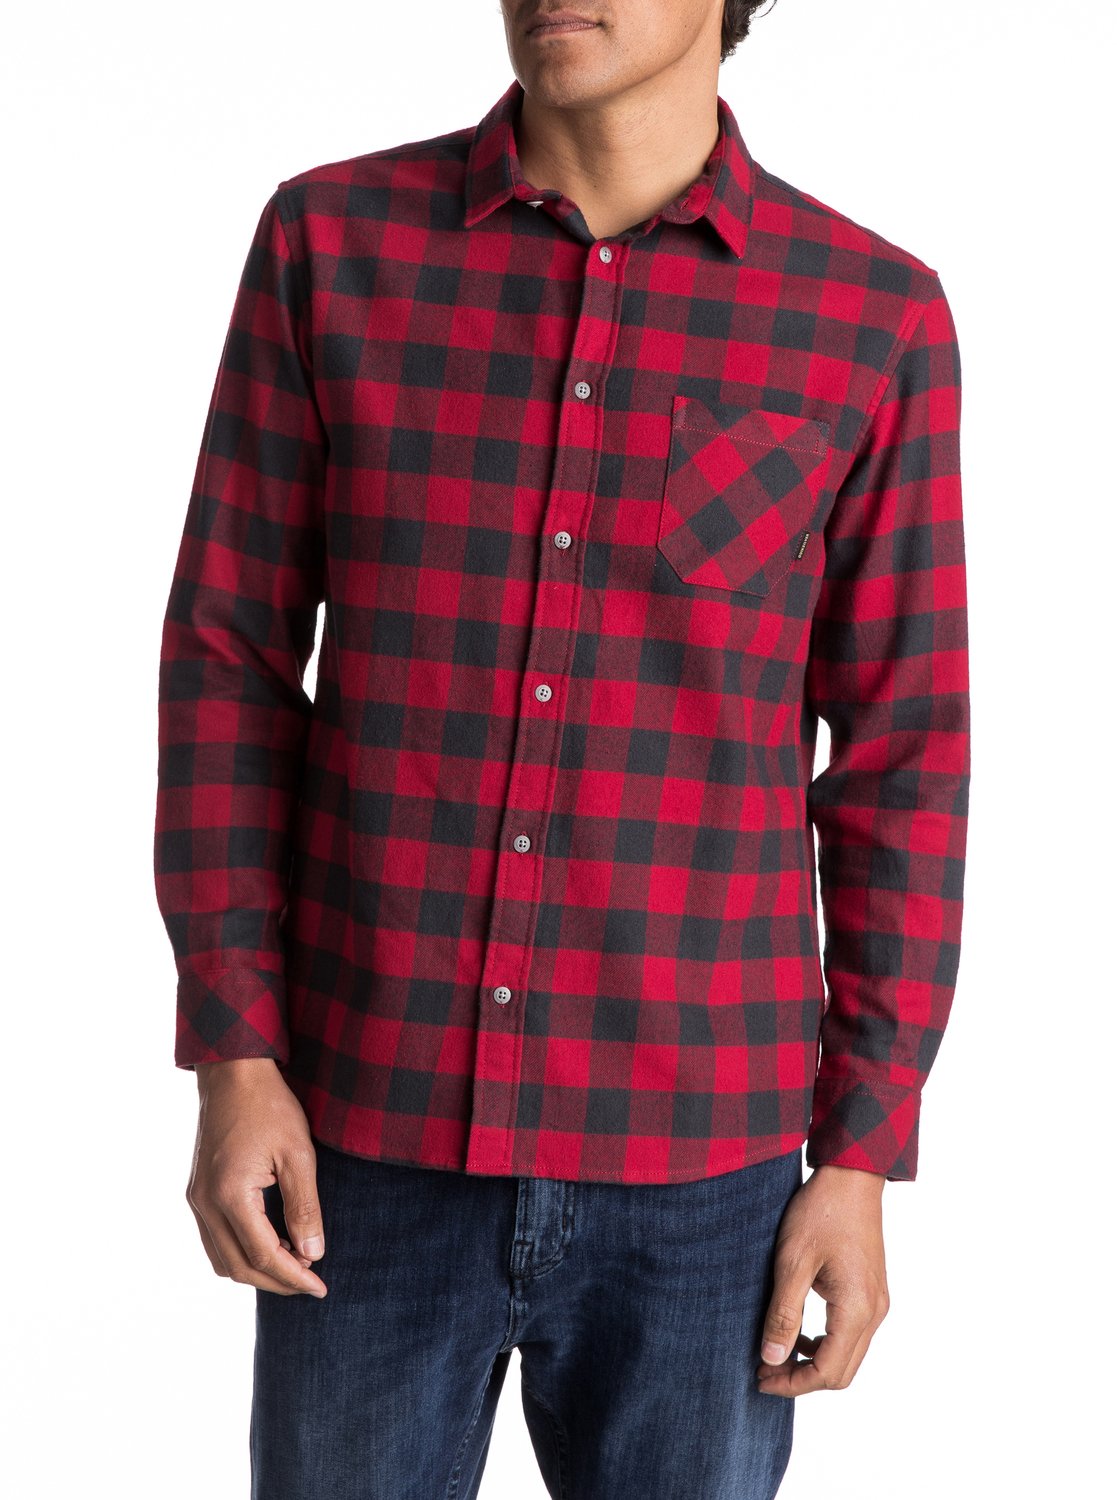 Motherfly Flannel - Chemise a manches longues pour Homme - Quiksilver